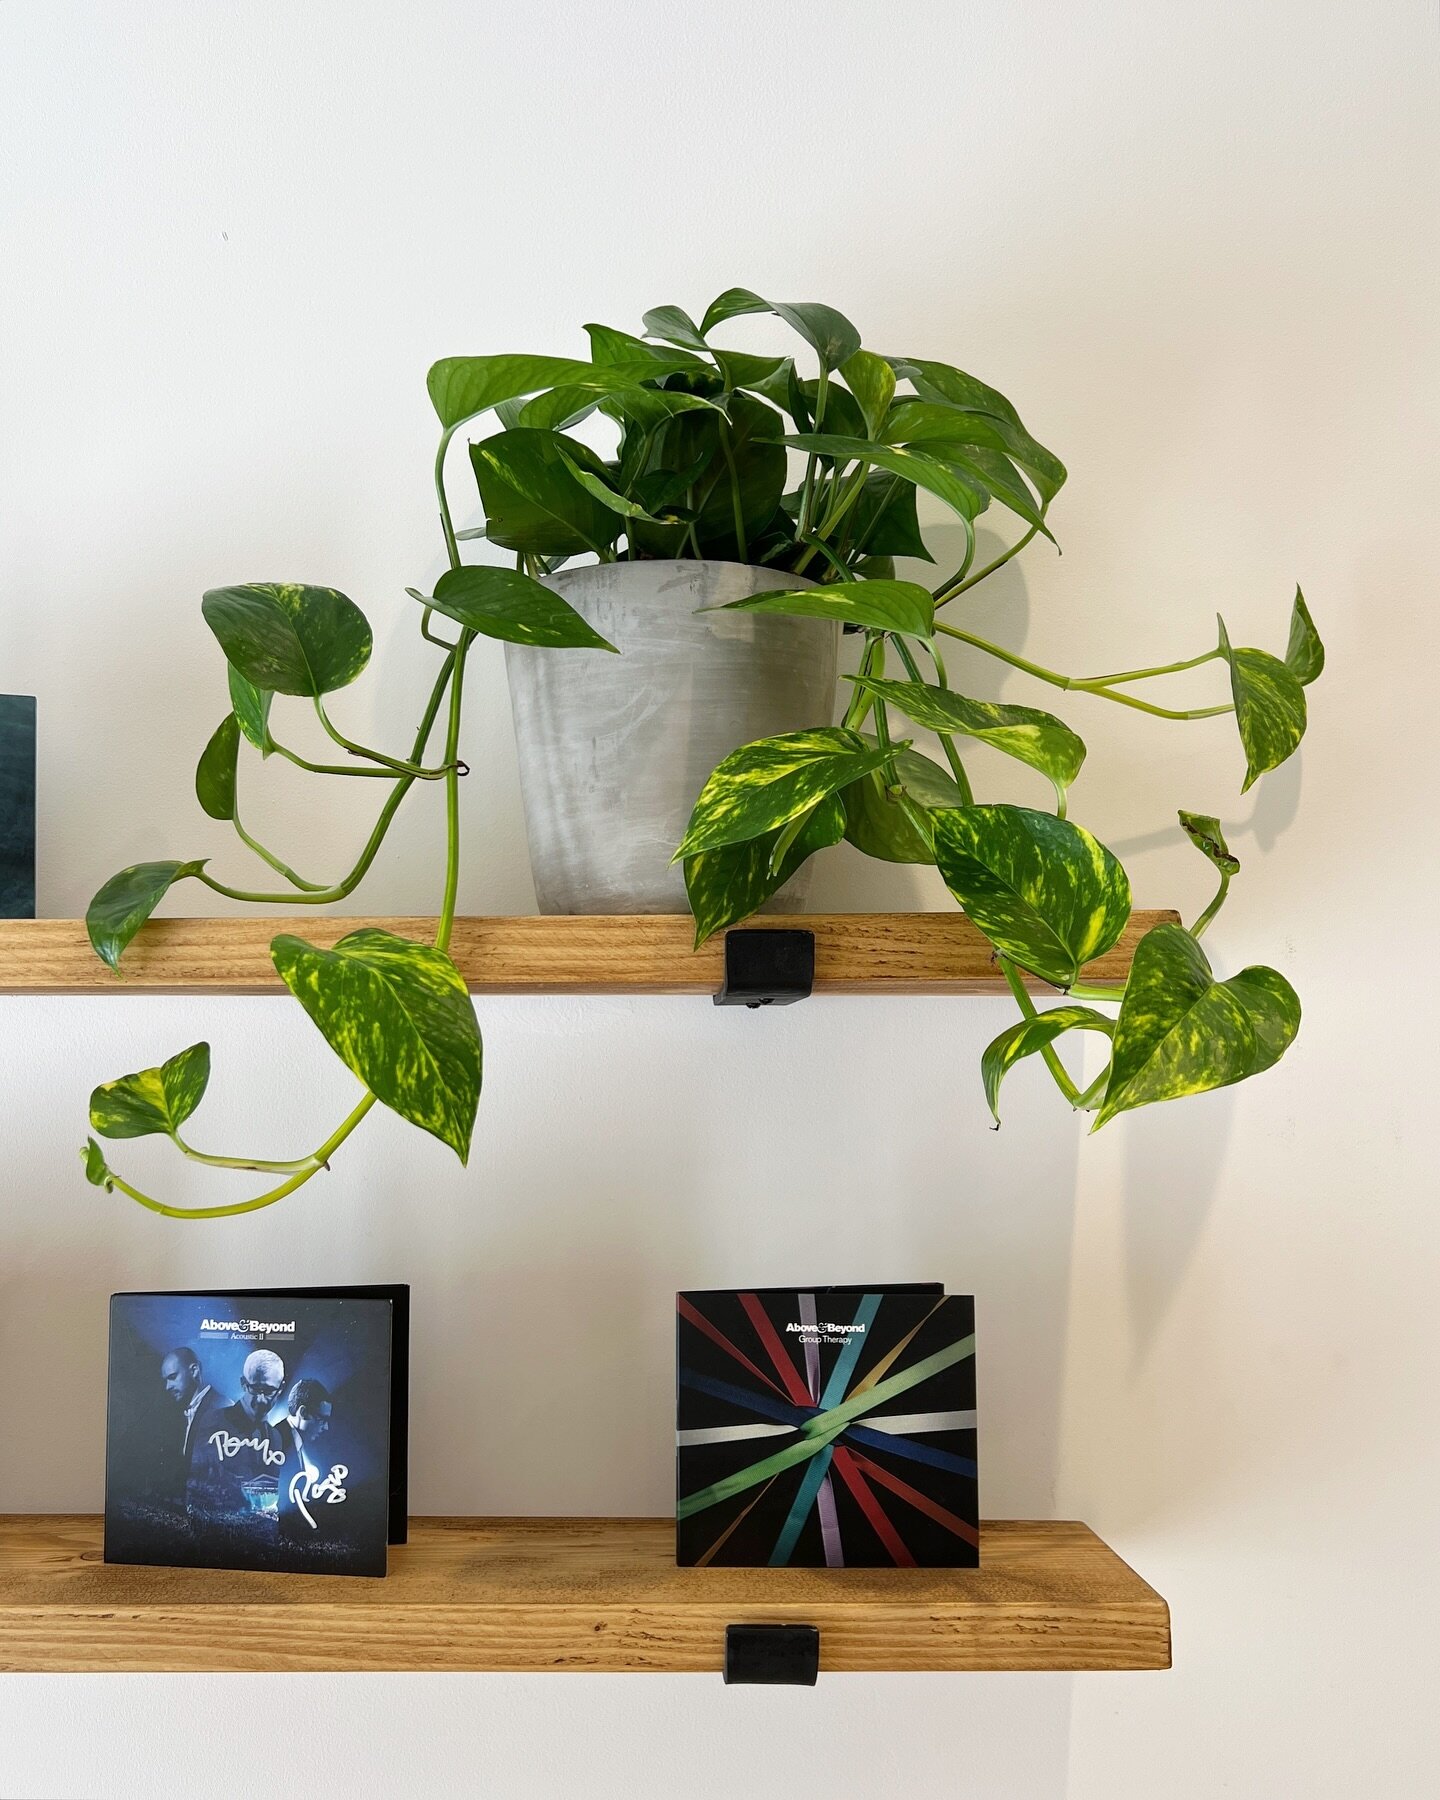 PLANTS BY THERE🪴- This shelf was completely empty&hellip;.. until I turned up and put a houseplant there! 

Invite me over to add some life to your workspace.  If you need a new indoor plant installation or just want to refresh an existing display i